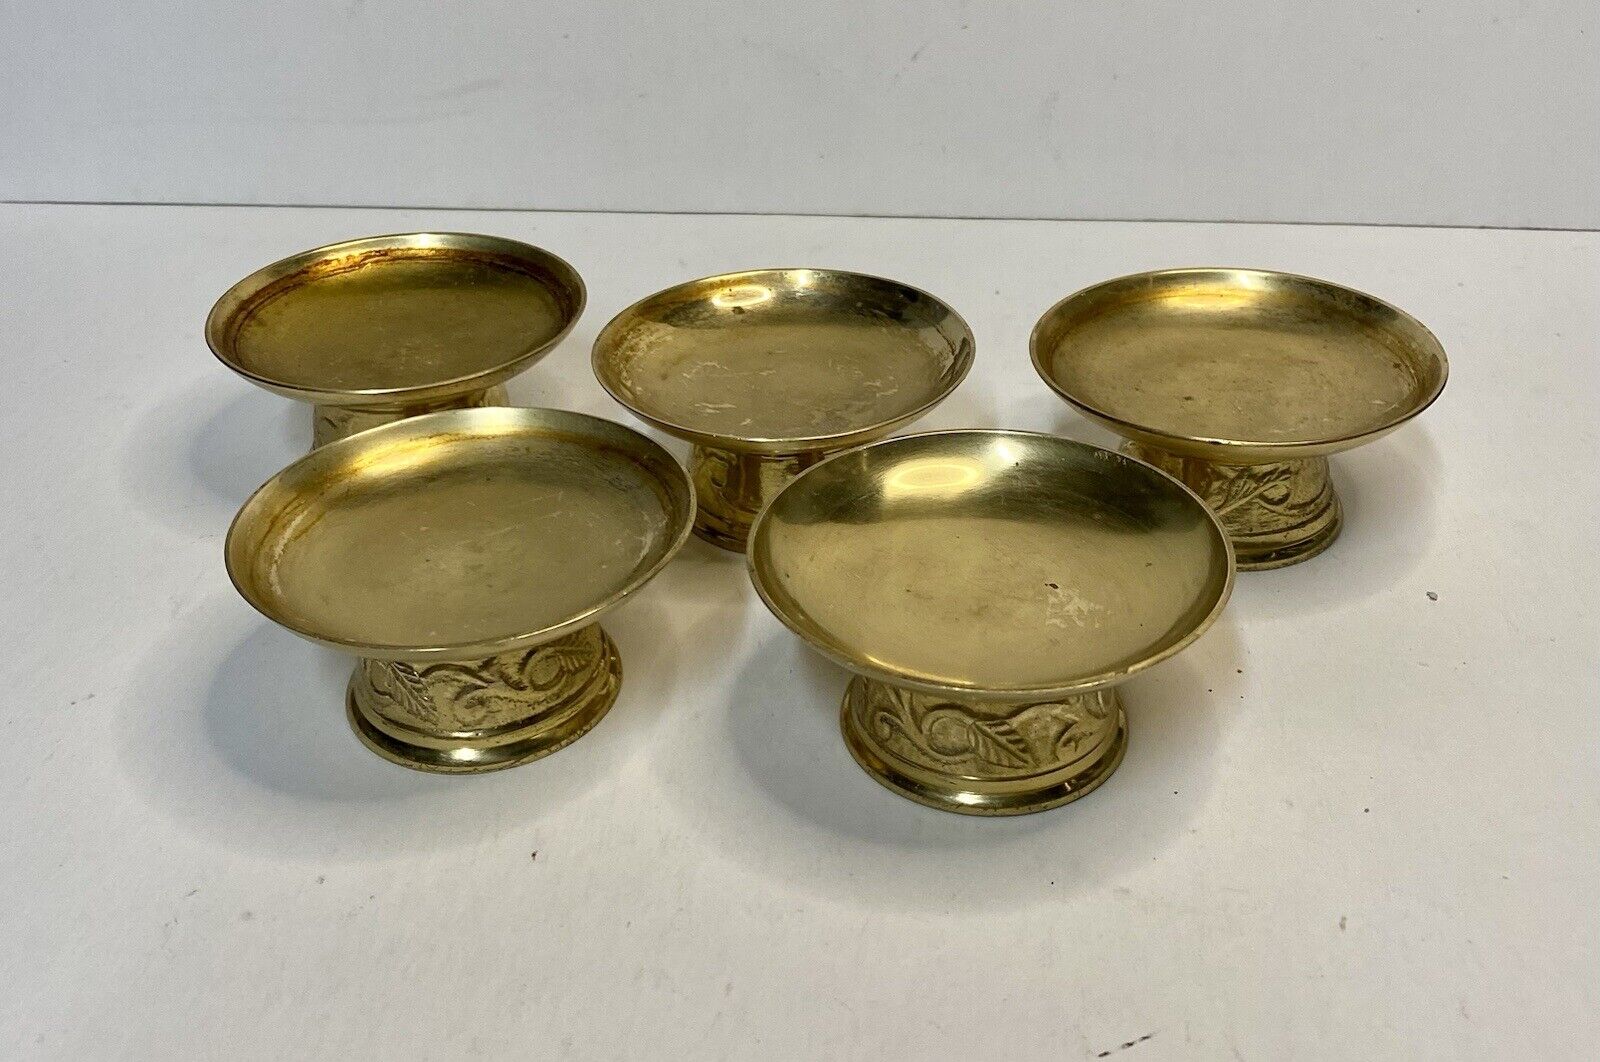 Set Of 5 Elegant Expressions Brass Pillar Candle Holder Collectible Home Decor